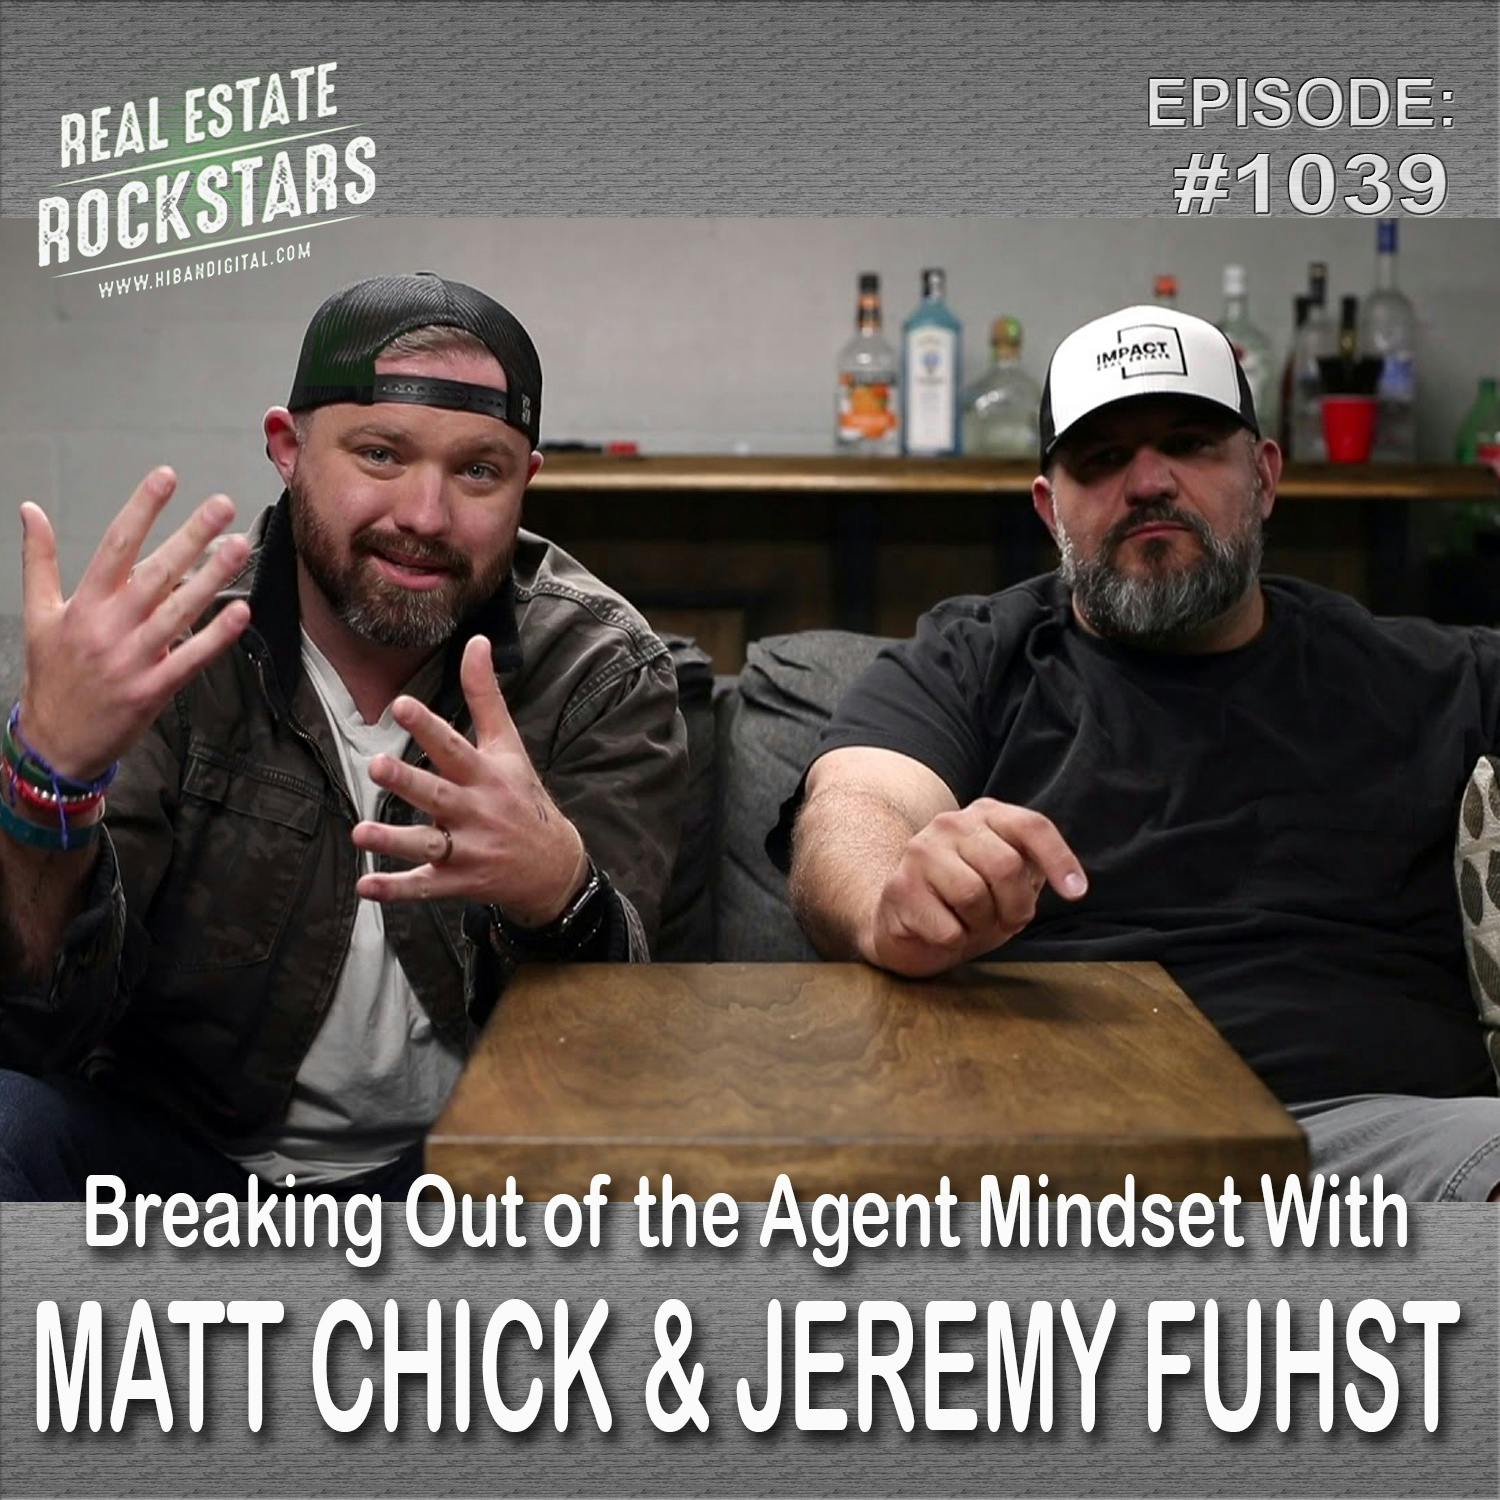 1039: Breaking Out of the Agent Mindset With Matt Chick and Jeremy Fuhst